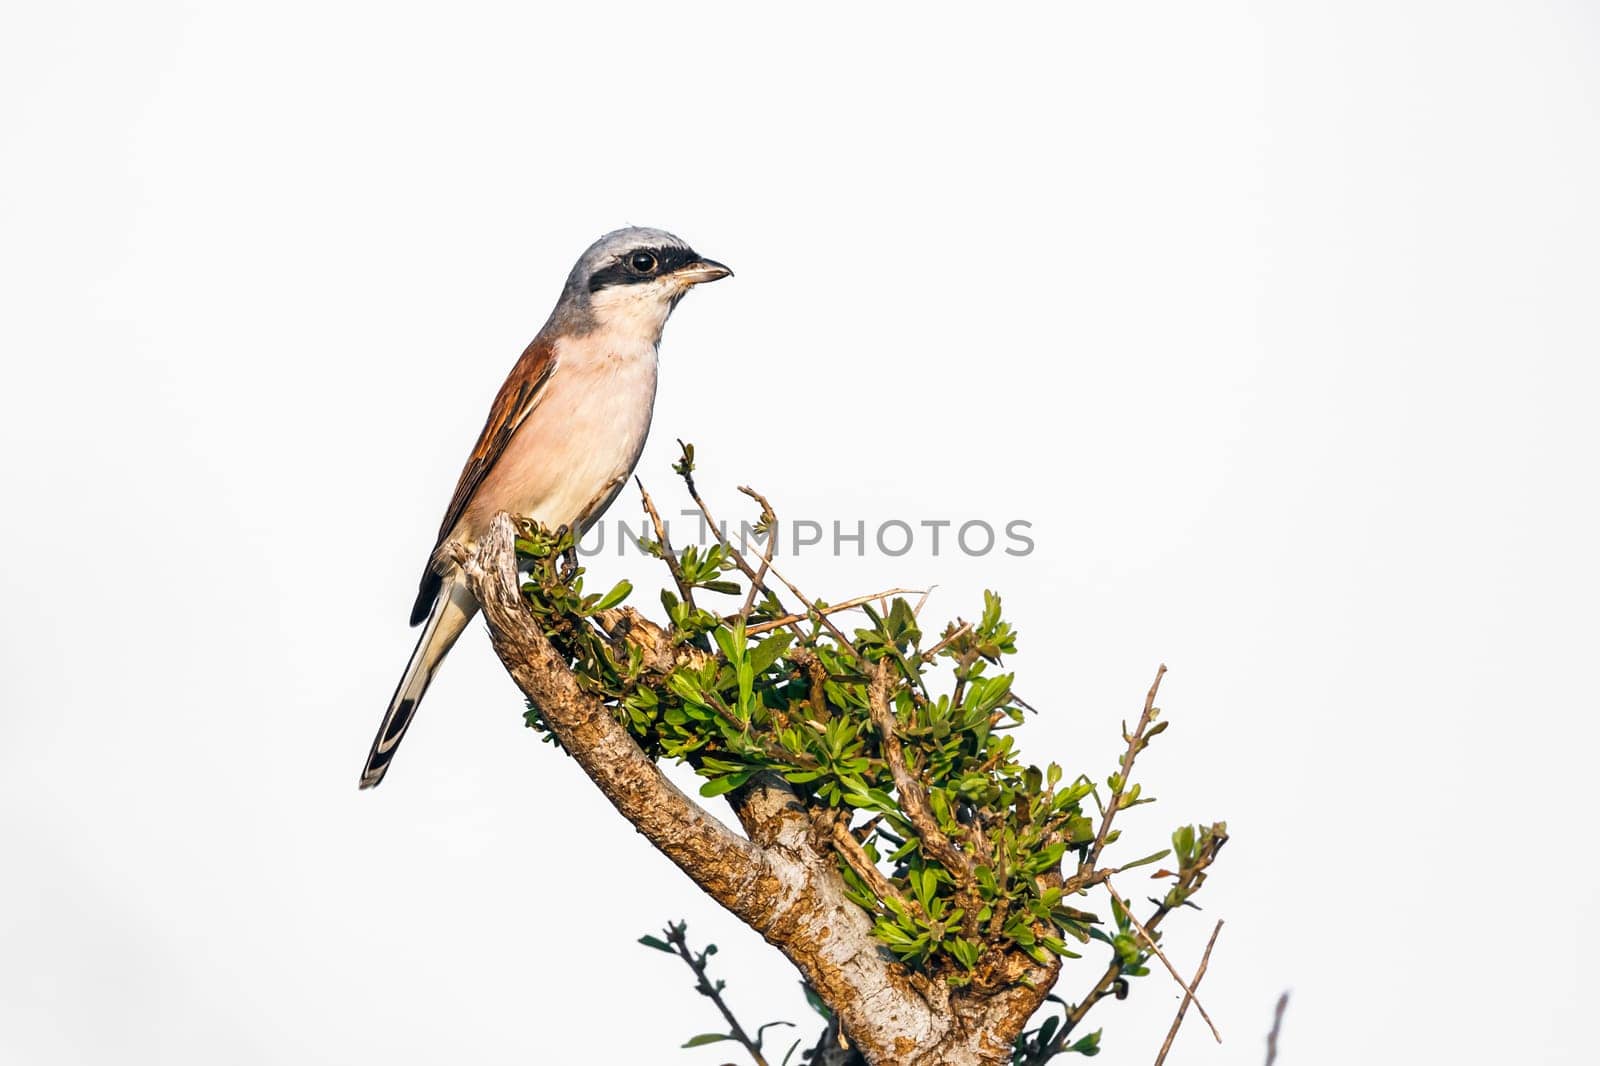 Red-backed Shrike isolated in white background  in Kruger National park, South Africa ; Specie Lanius collurio family of Laniidae